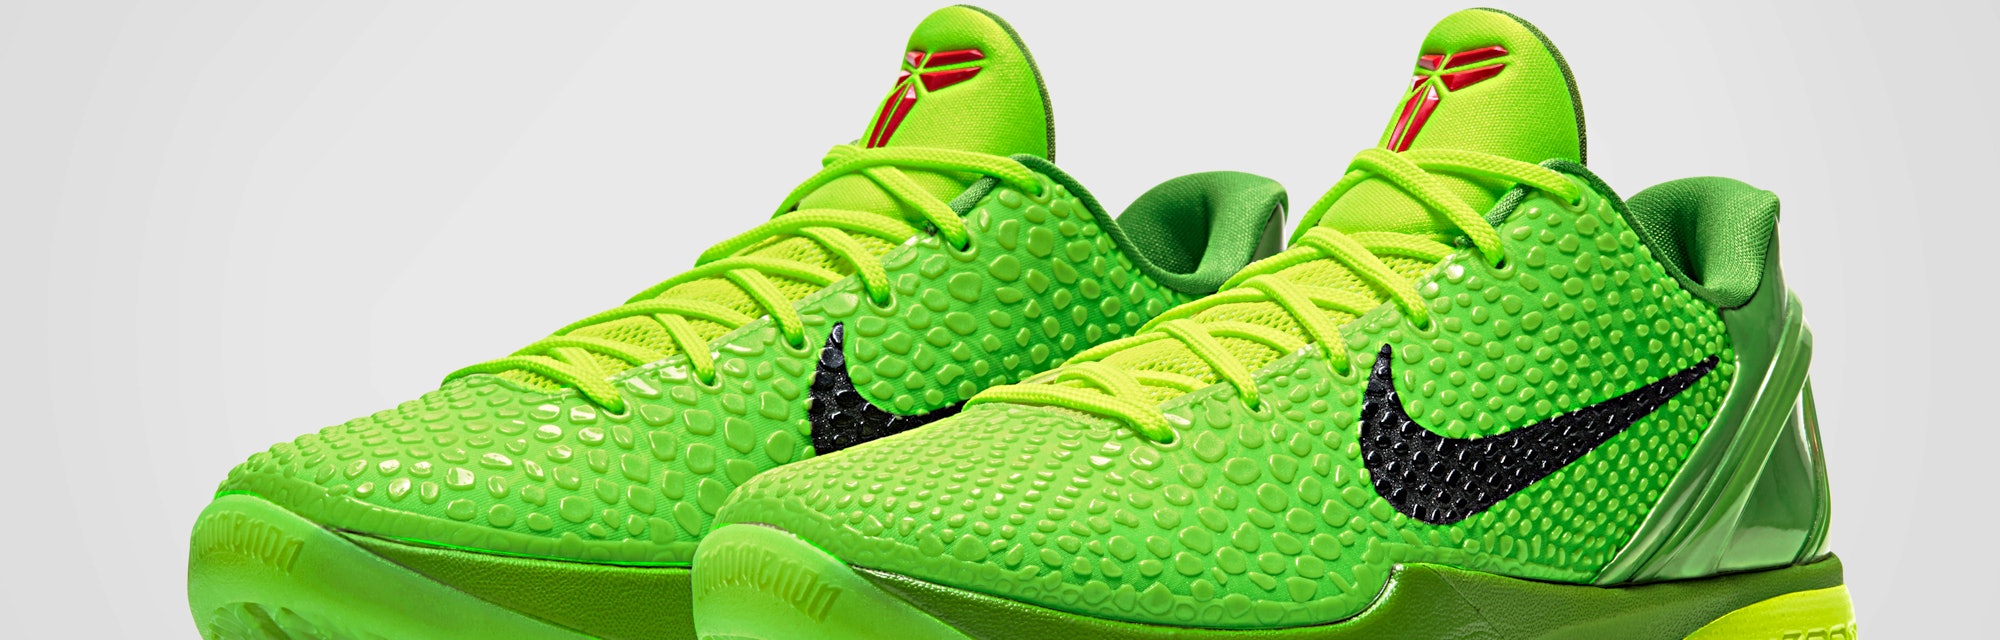 Nike's kobe vi iconic Kobe 6 'Grinch' sneaker is coming back better than ever